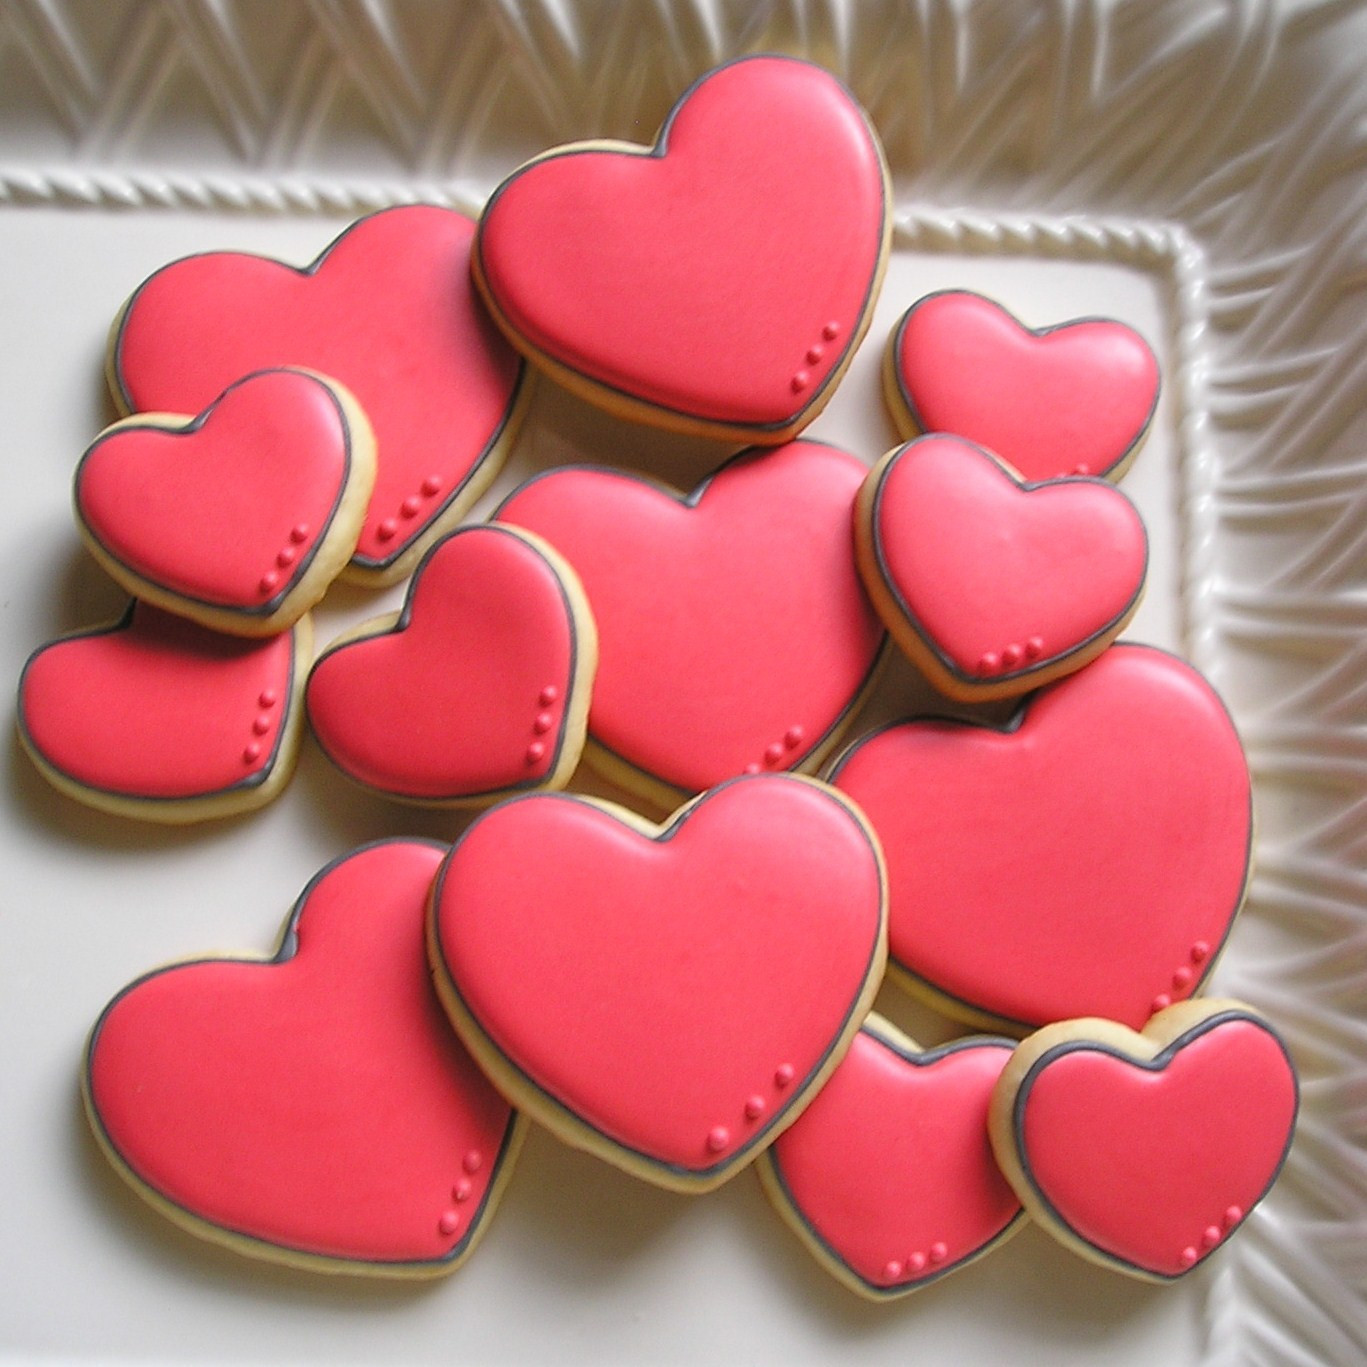 Decorating Valentine Sugar Cookies
 So what would I have done differently